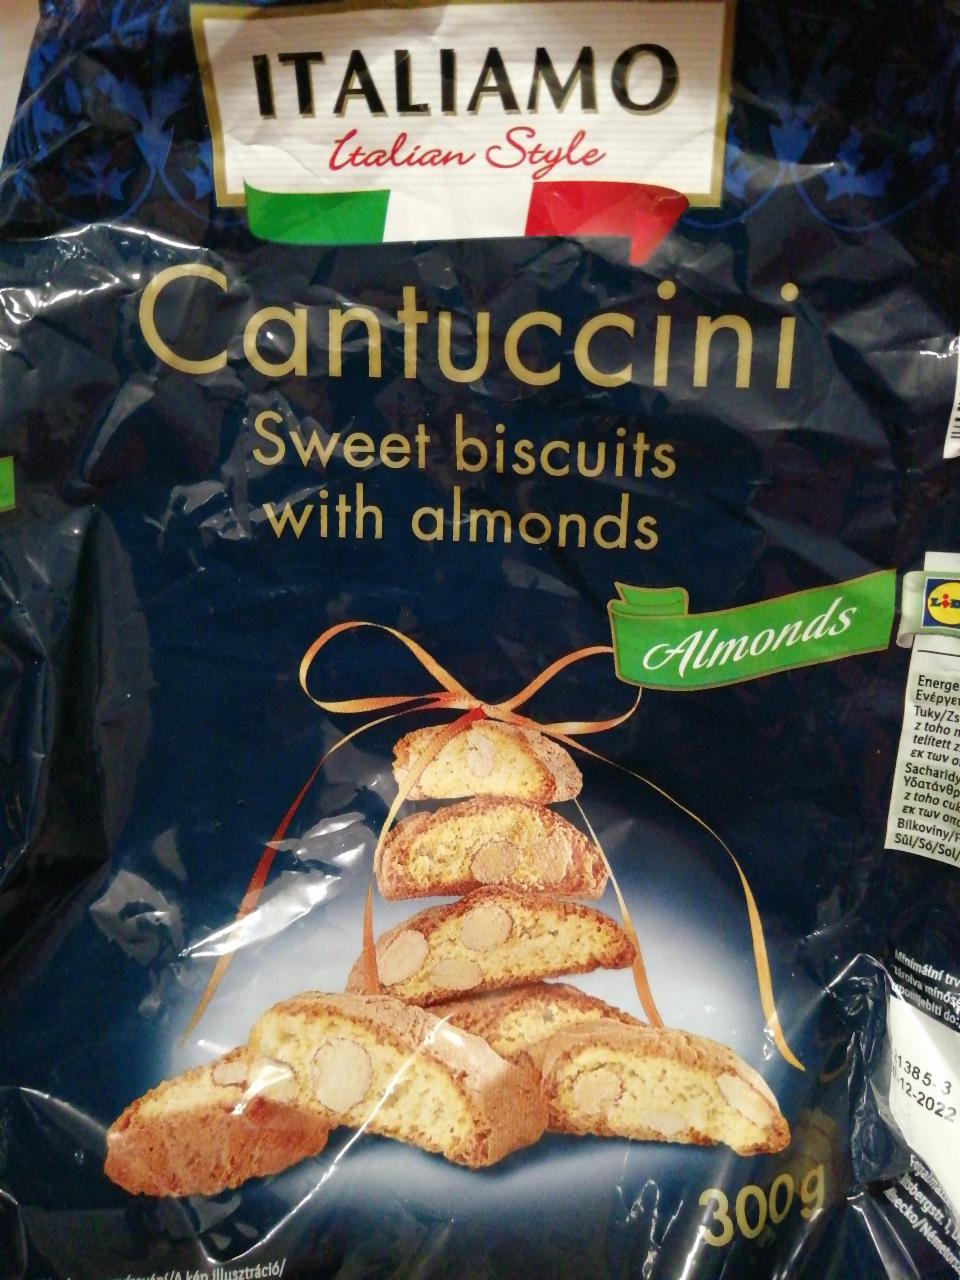 Cantuccini Sweet biscuits with almonds Italiamo - kalorie, kJ a nutriční  hodnoty